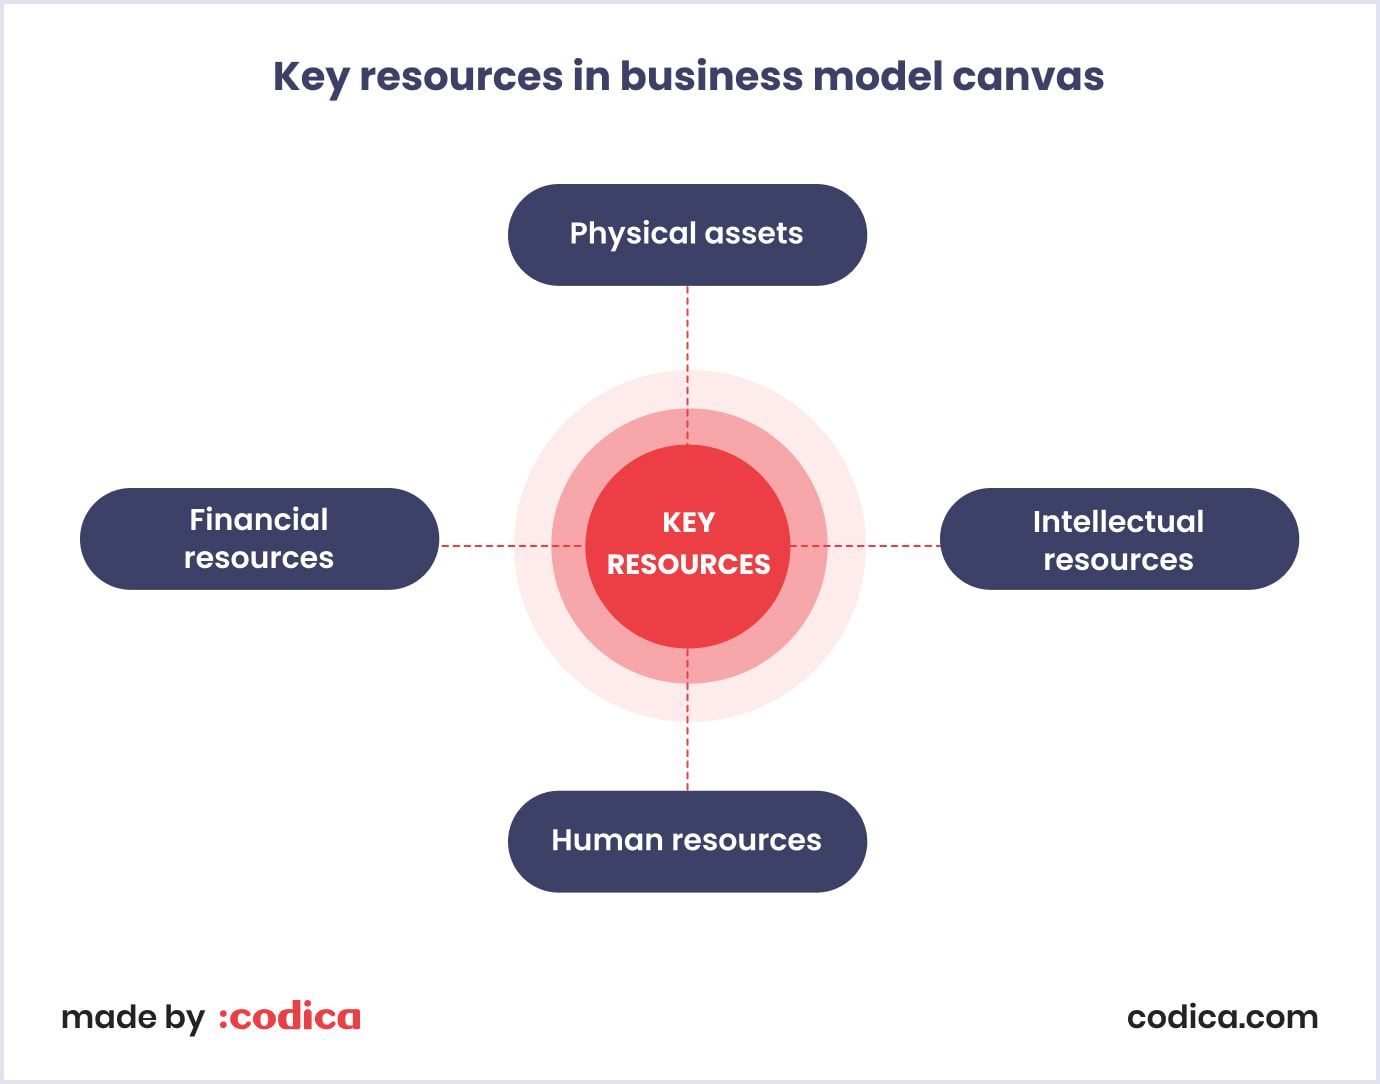 Key resources in business model canvas